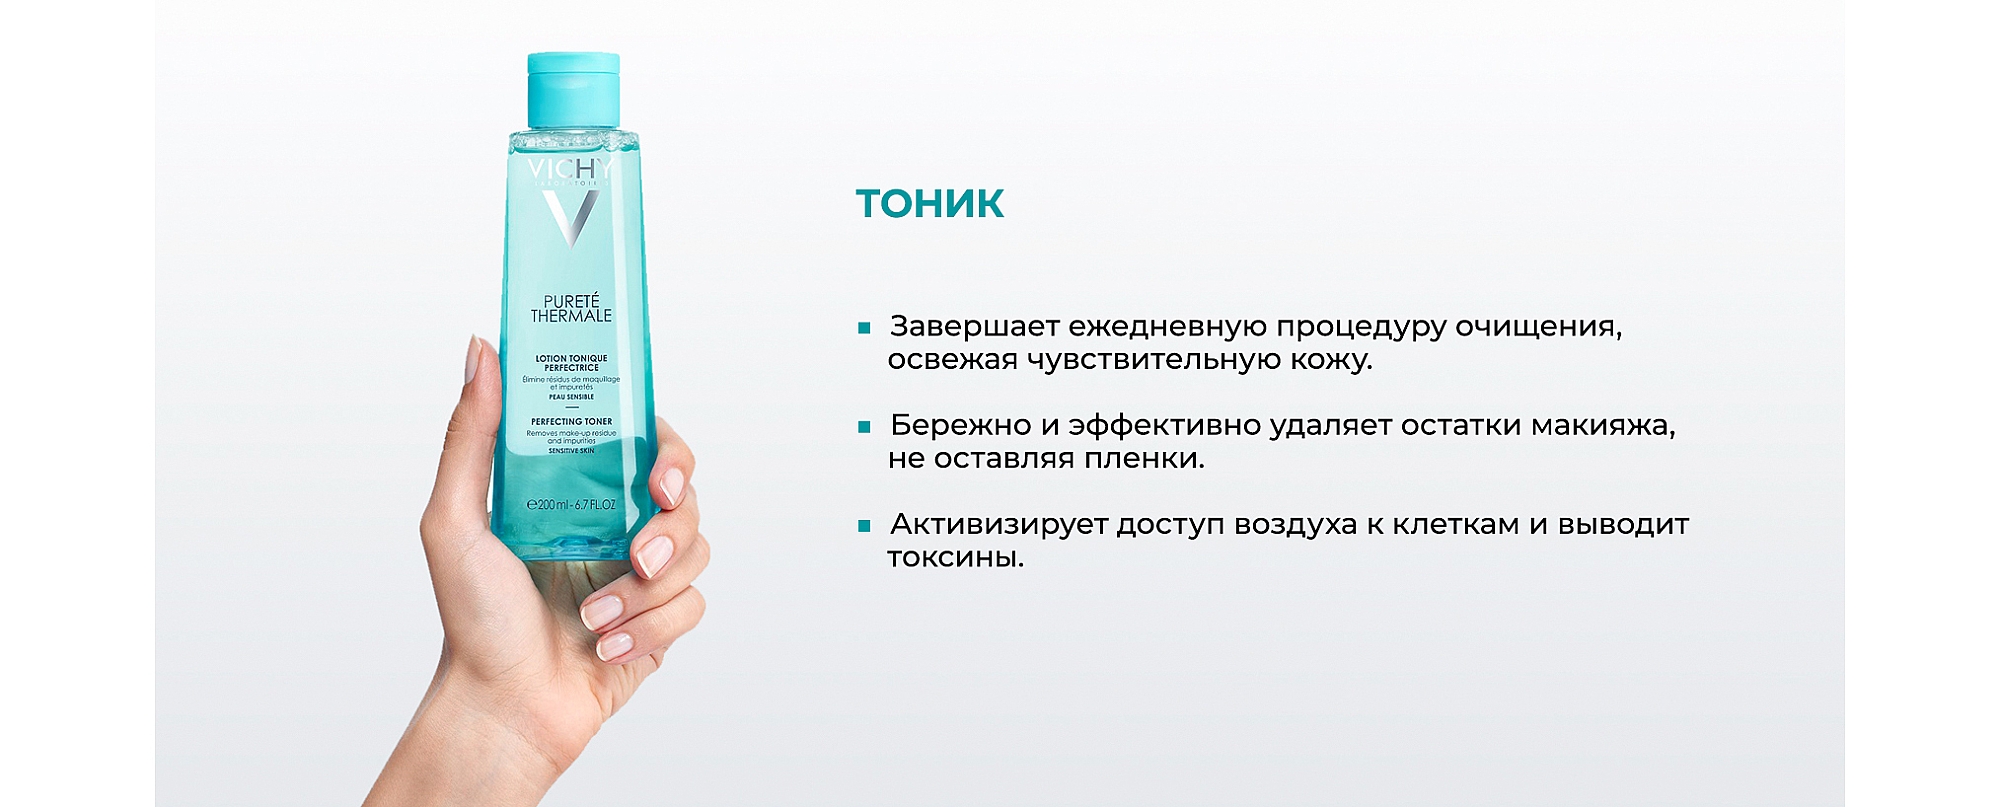 Vichy Purete Thermale Perfecting Toner